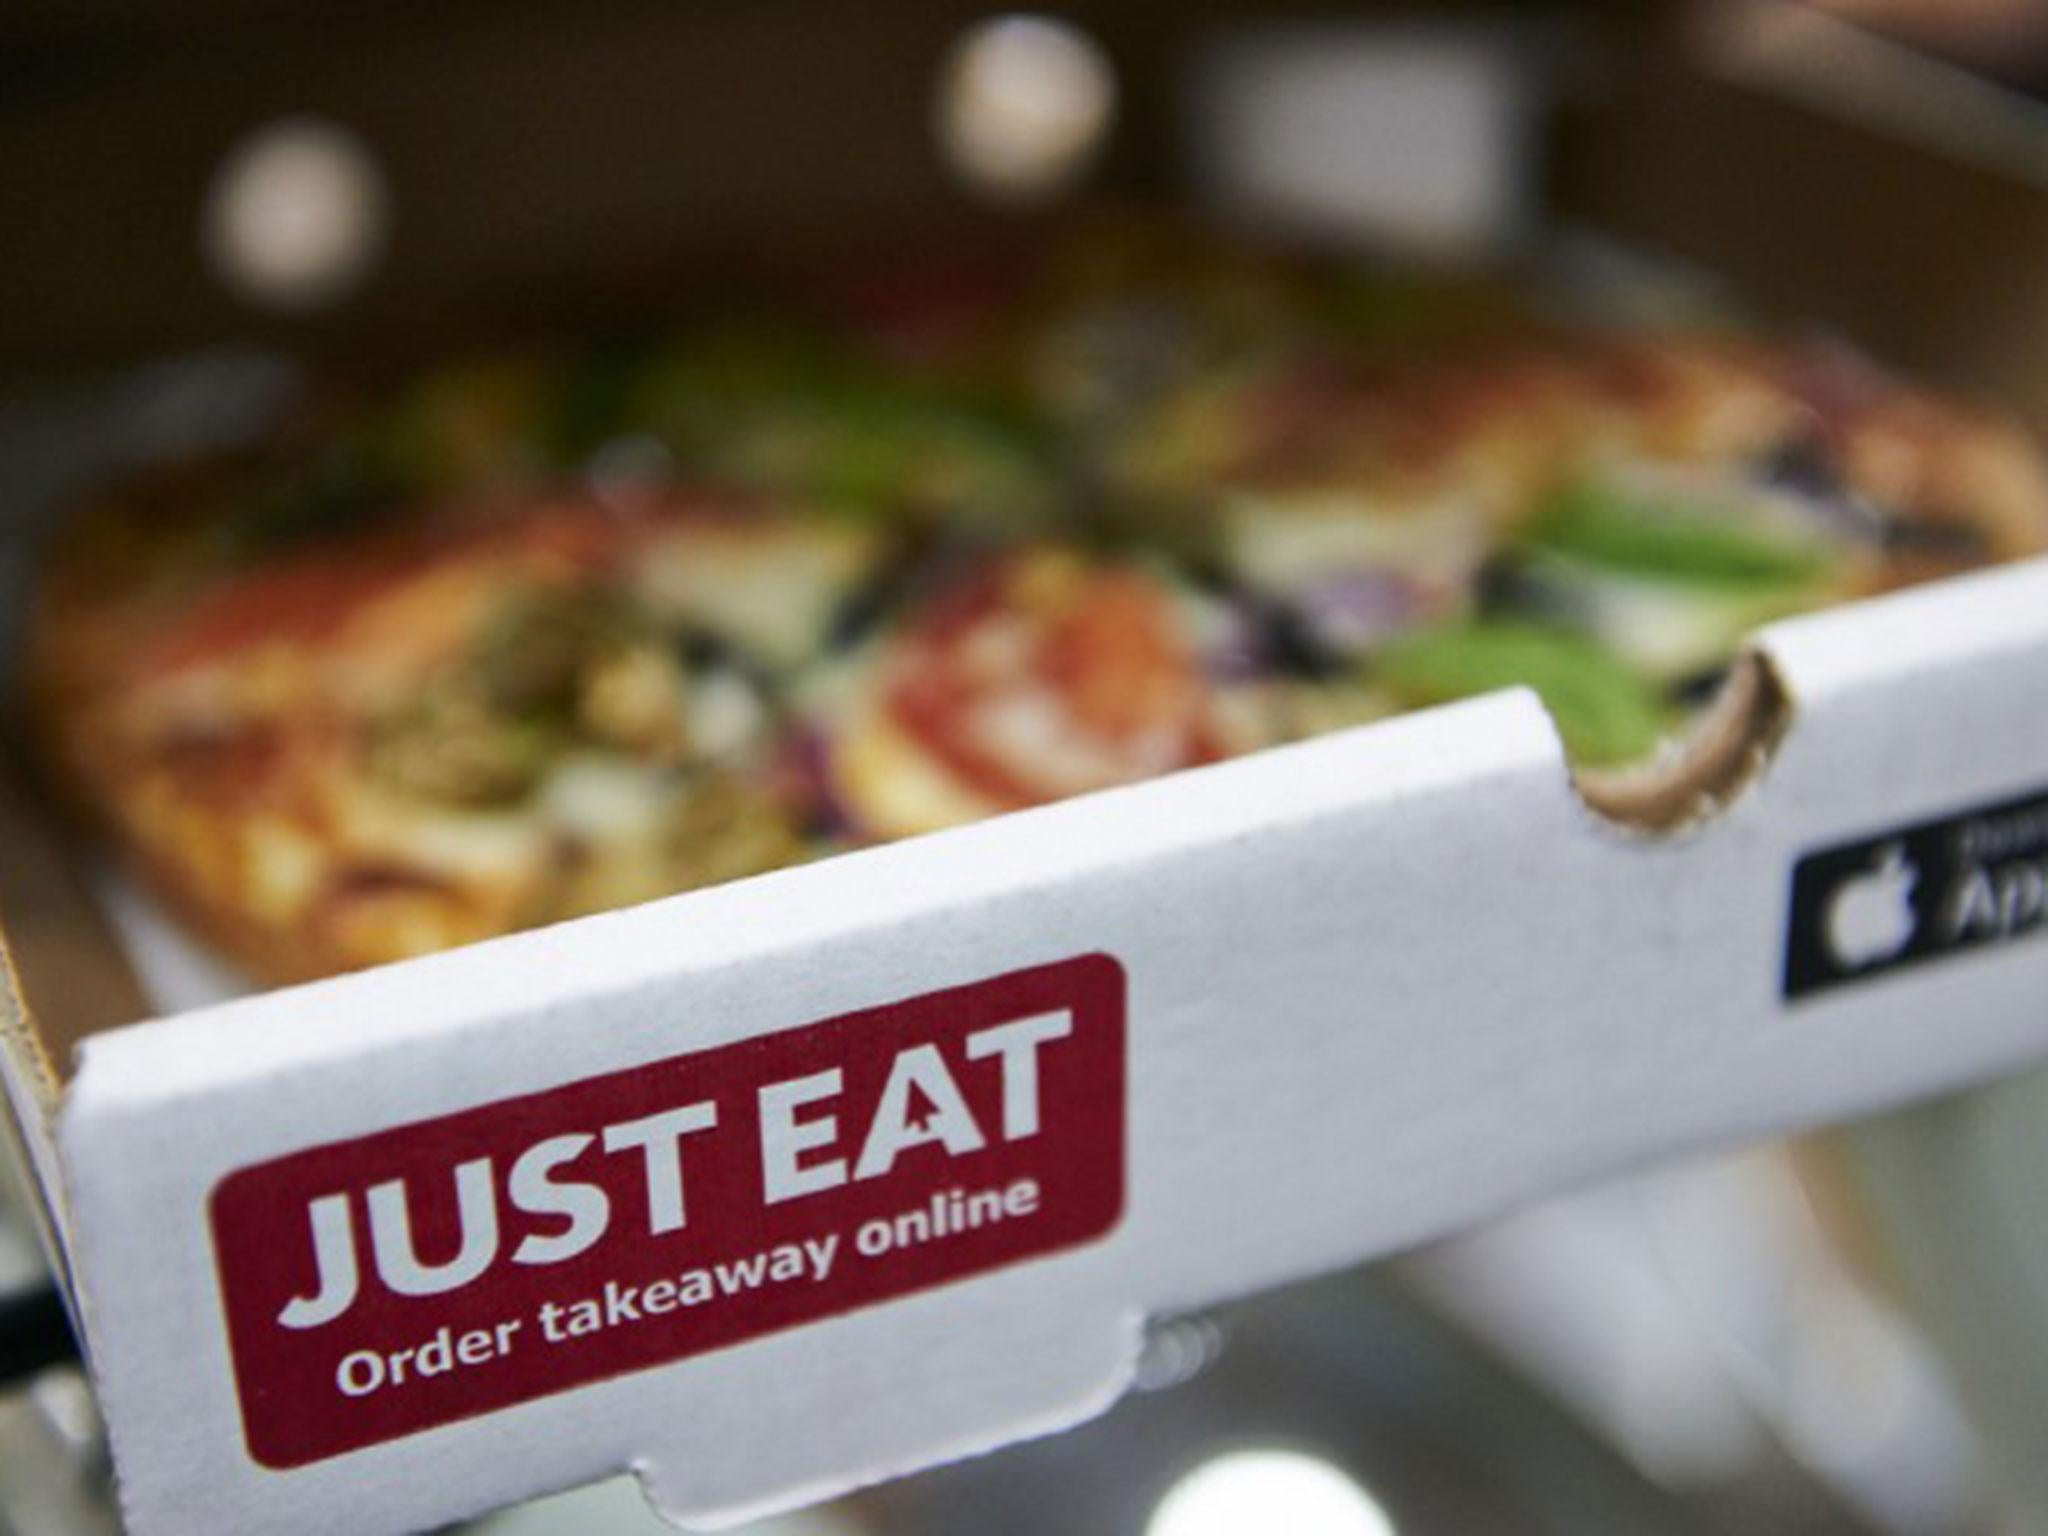 Just Eat is moving into deliveries